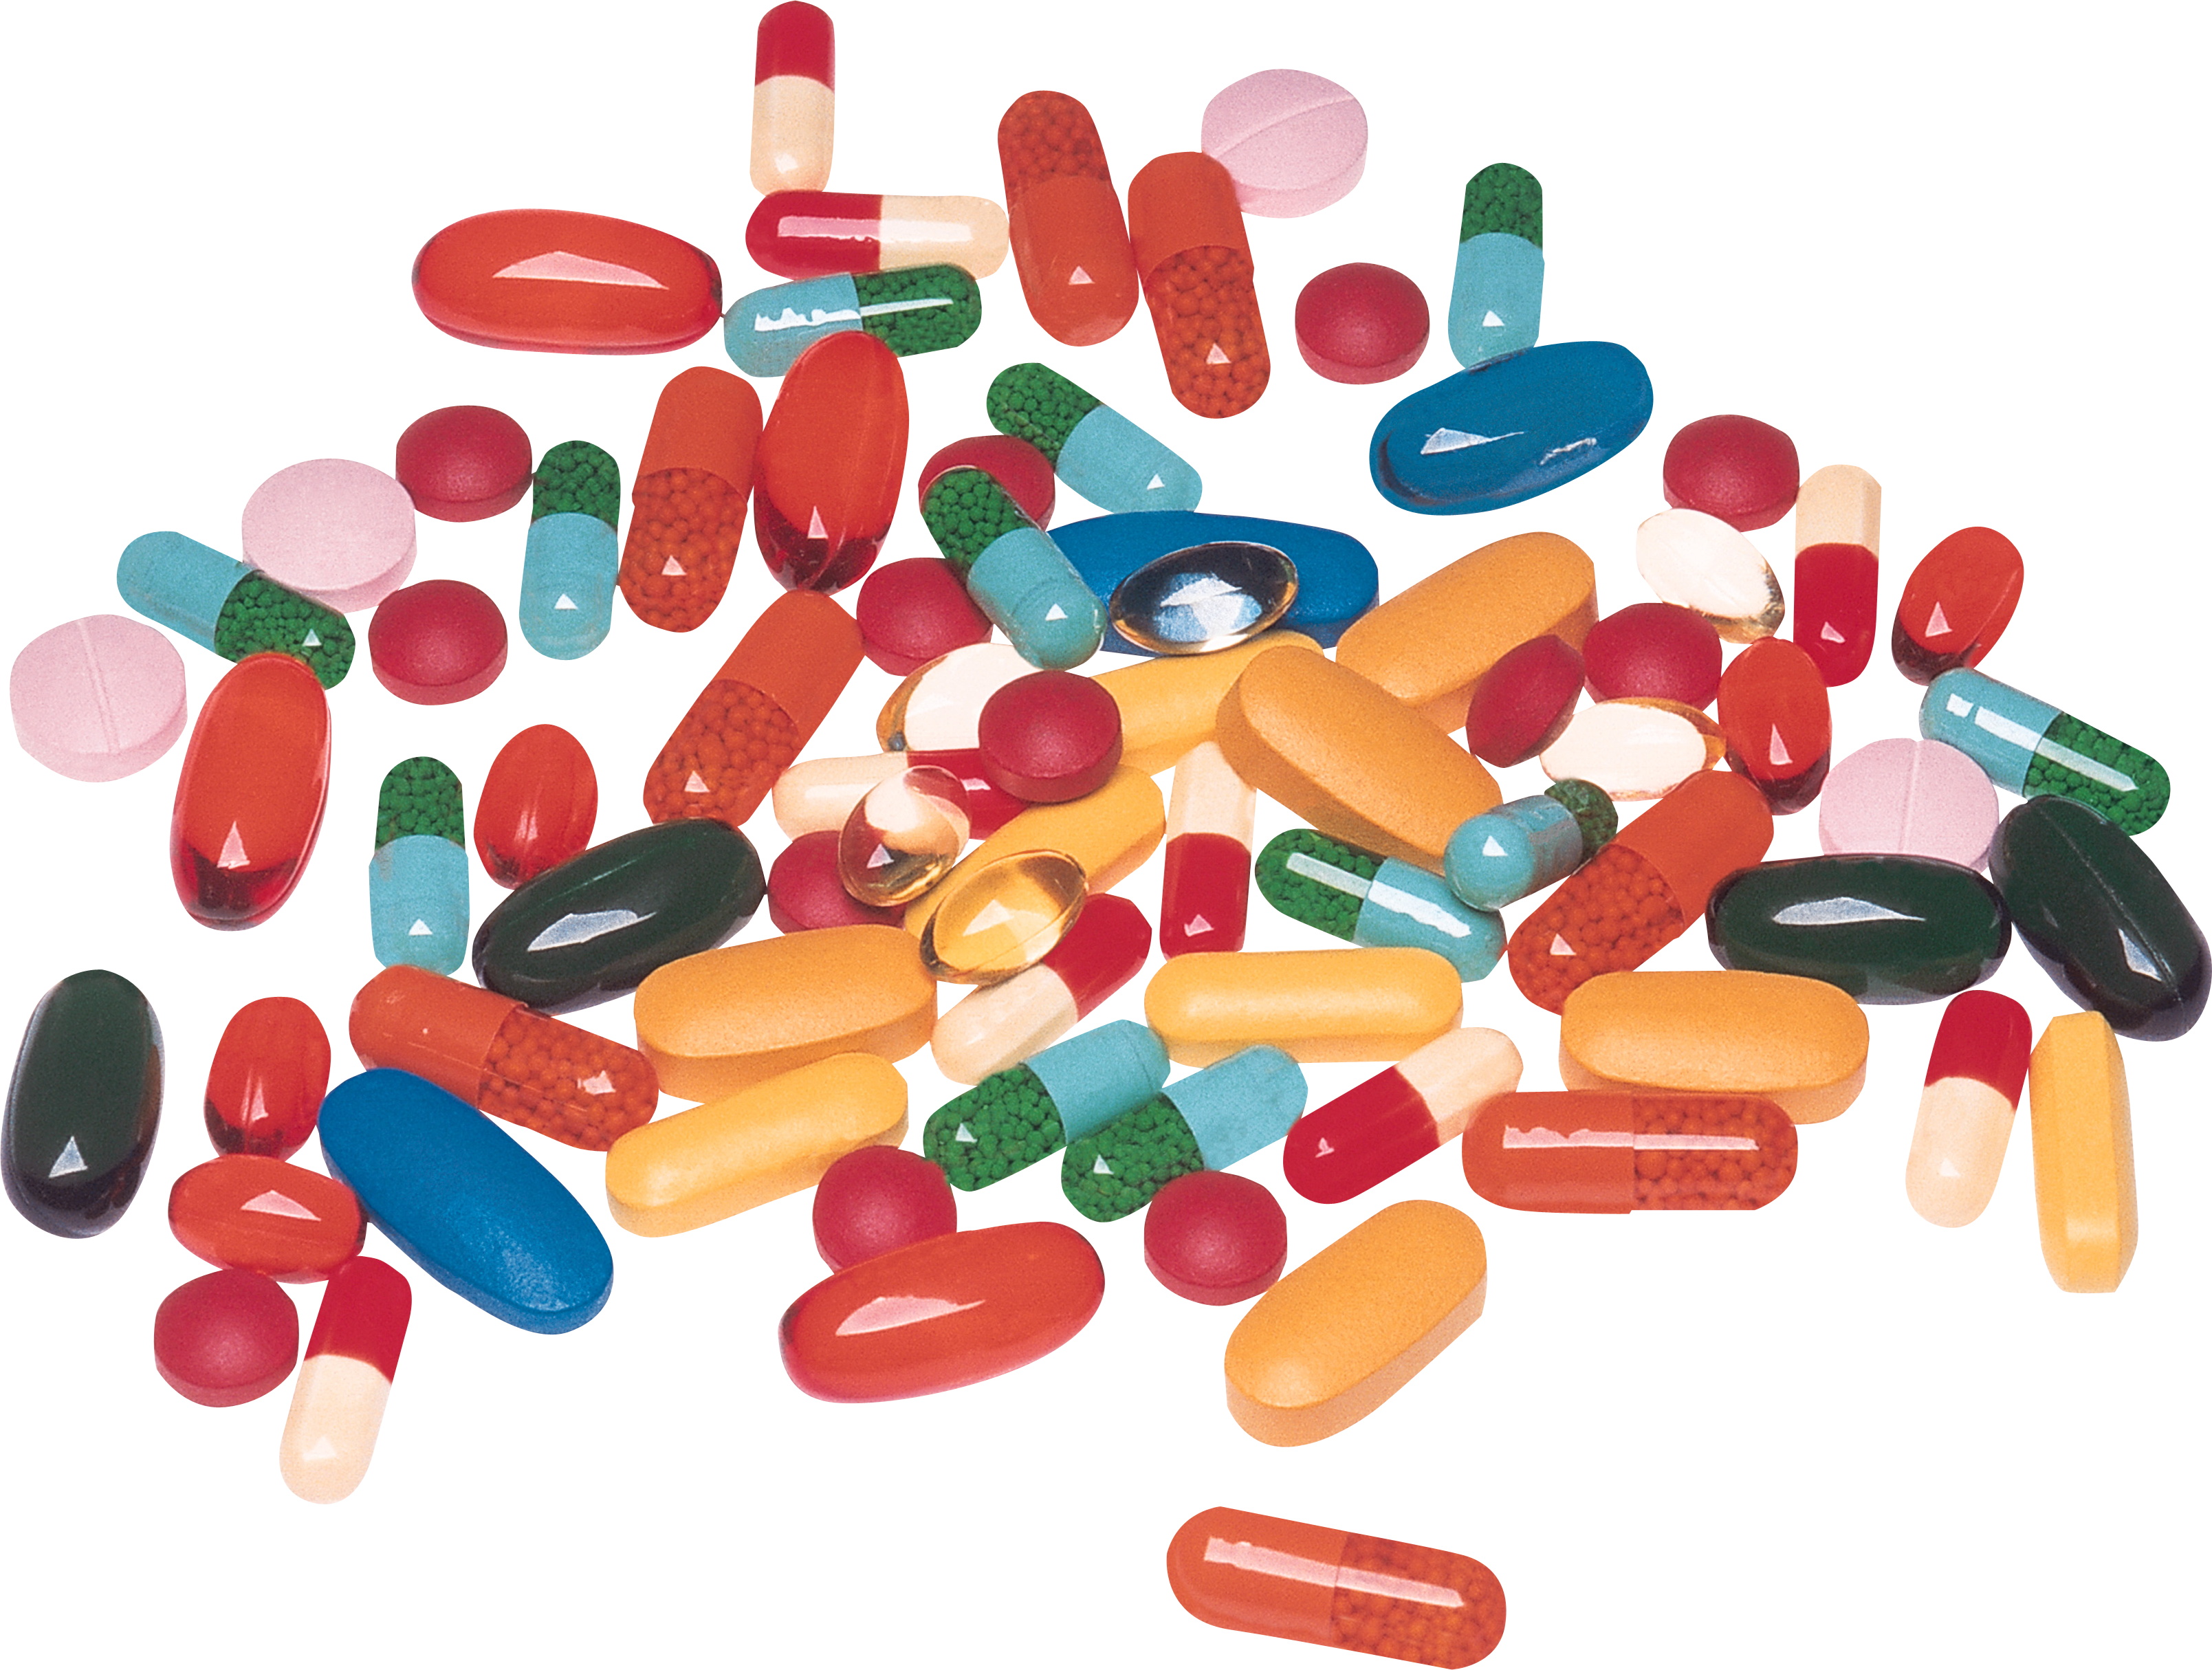 A Pile Of Different Colored Pills